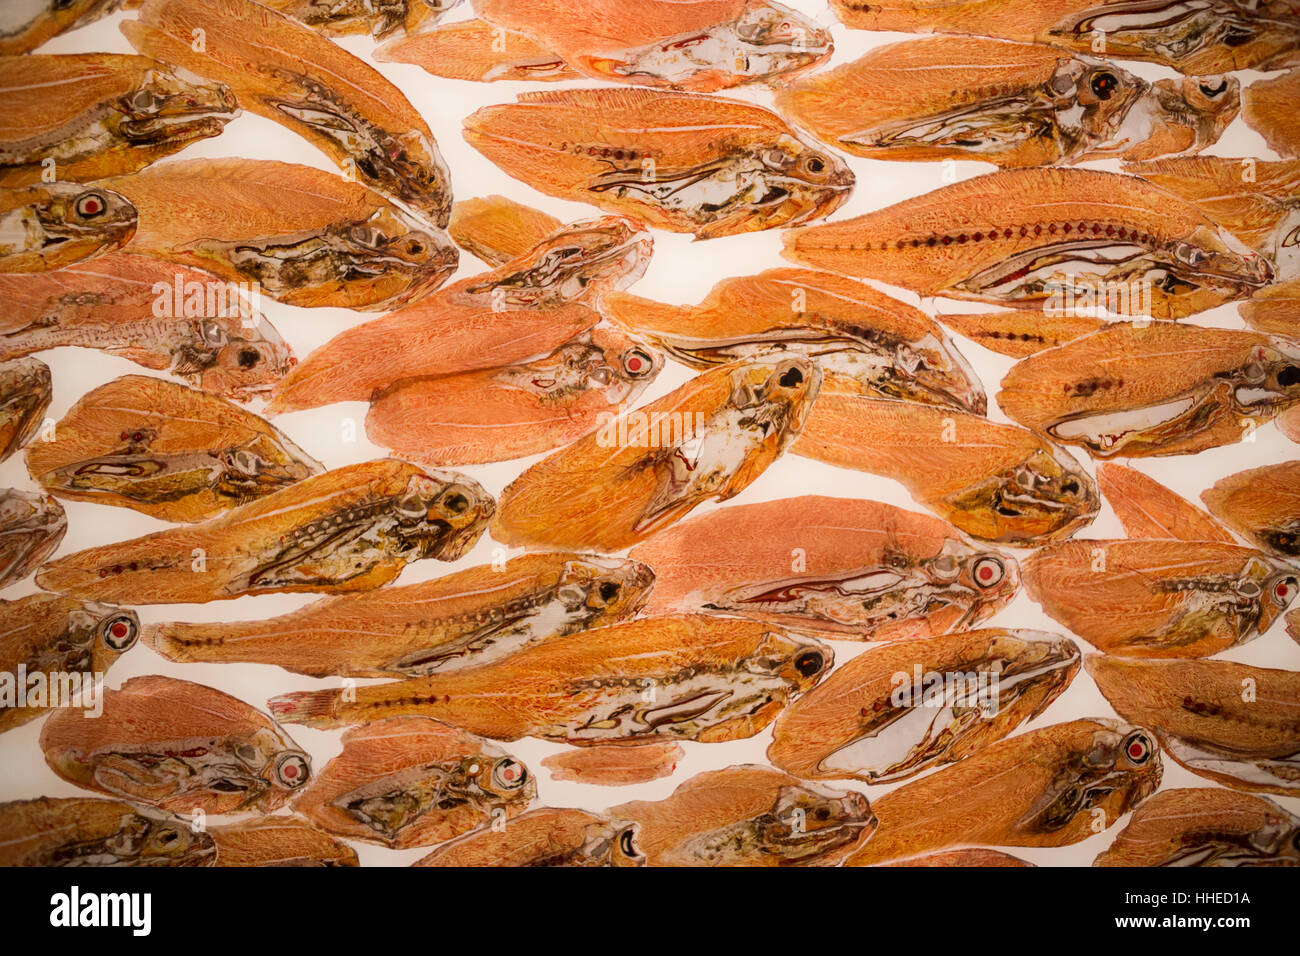 Cross-section of fish at a Body World exhibition in Berlin, Germany Stock Photo